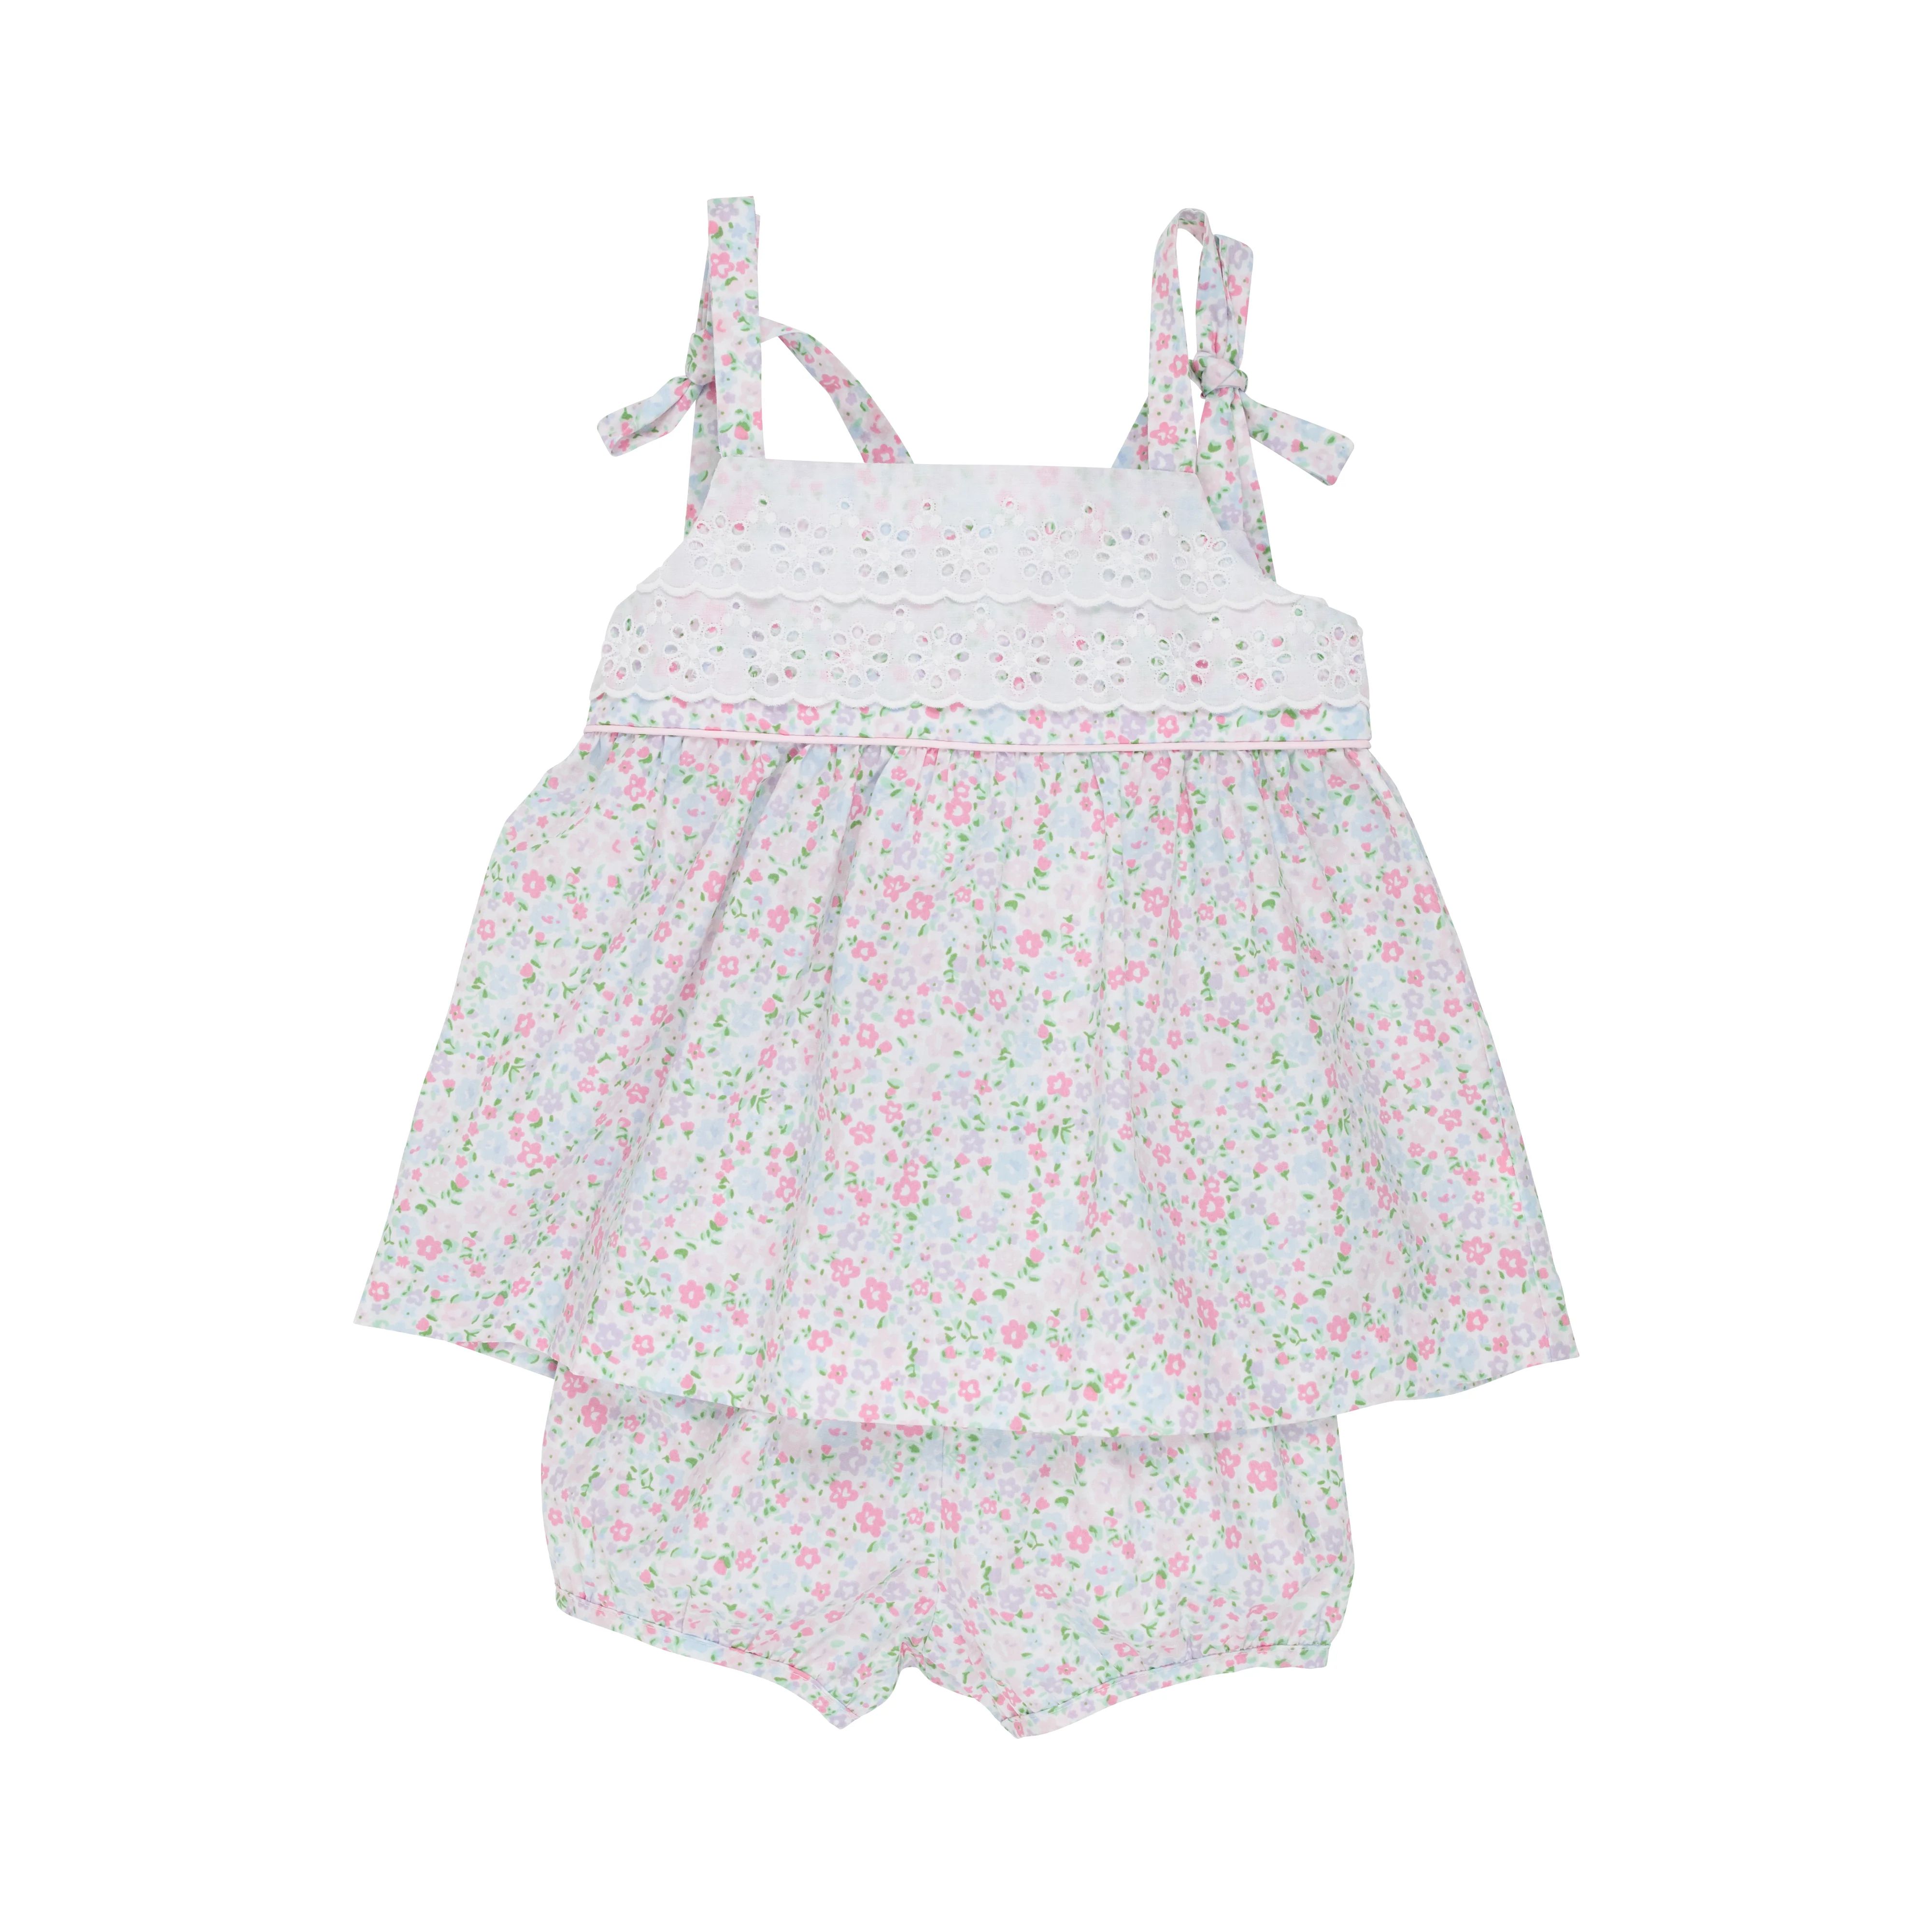 Idabelle's Bloomer Set - Mountain Brook Mini Floral with Worth Avenue White Eyelet | The Beaufort Bonnet Company